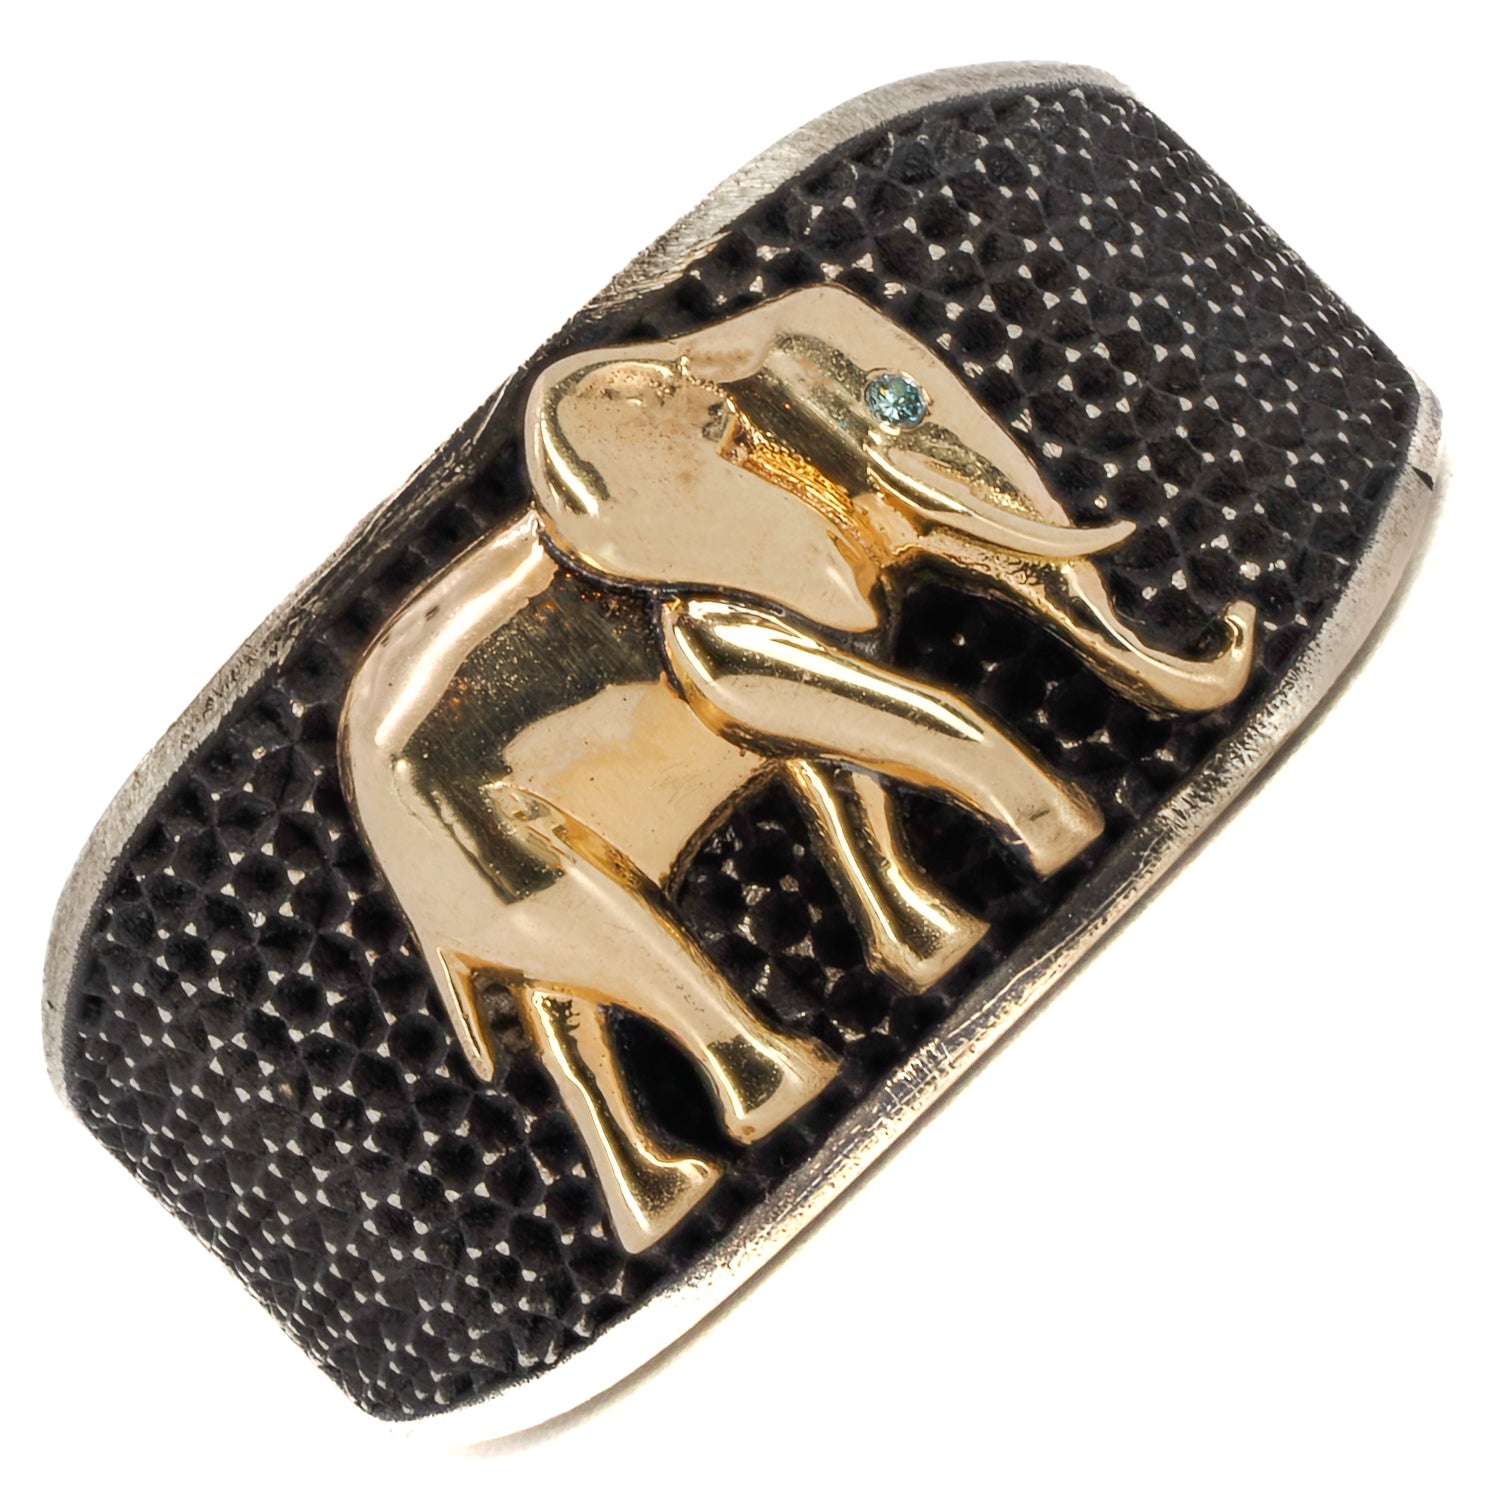 Symbol of Strength and Wisdom - Elephant Ring in Two Precious Metals.